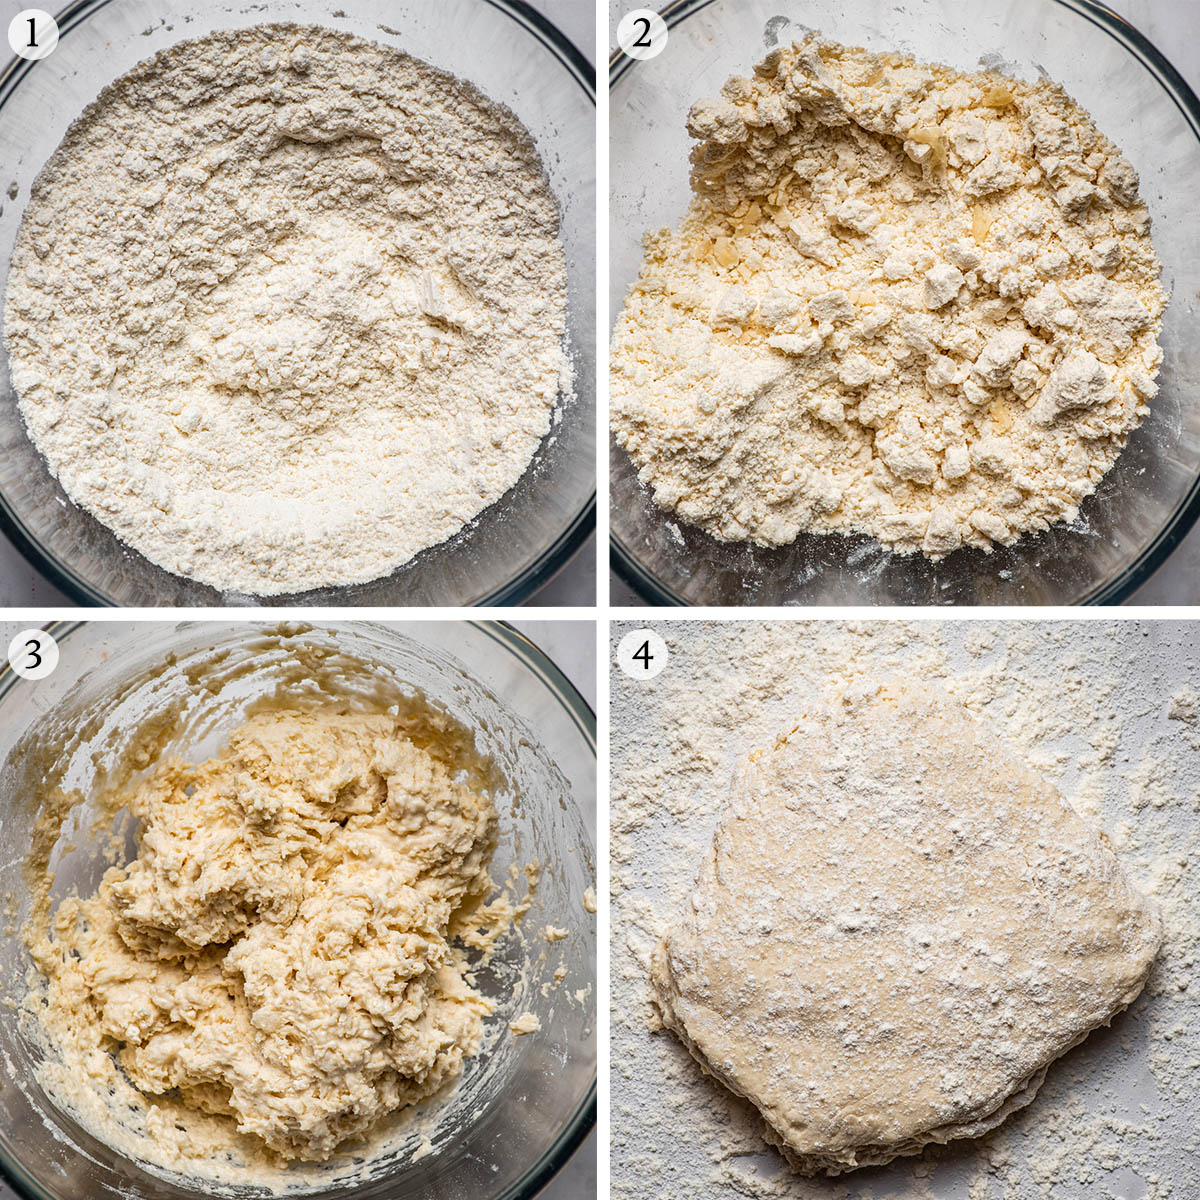 Coconut oil biscuits steps 1 to 4.